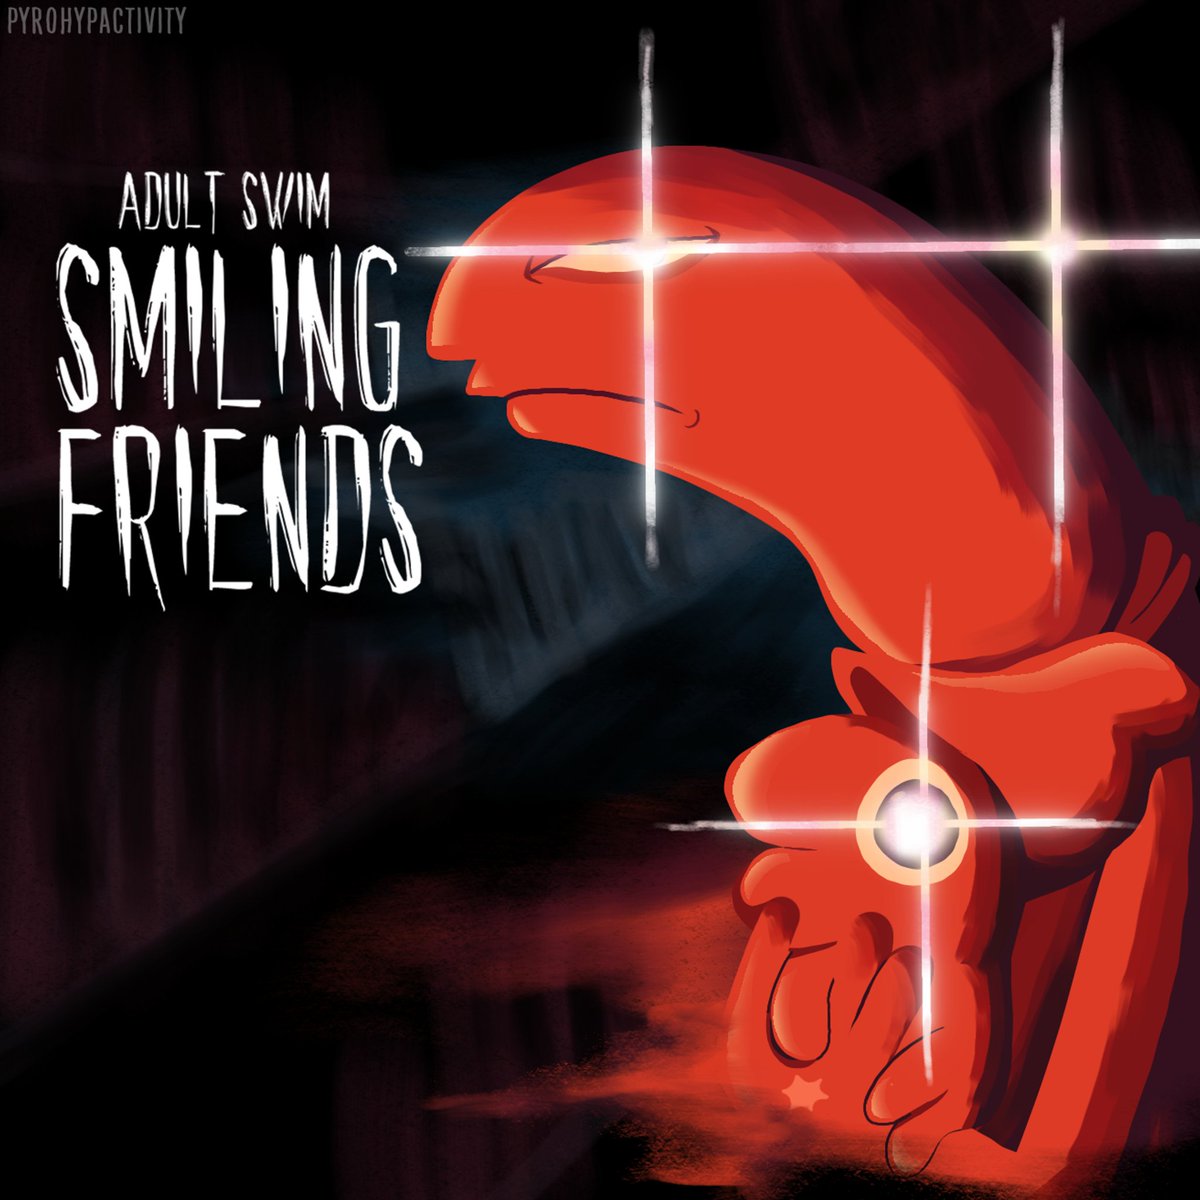 my contribution to this fandom 
#smilingfriends